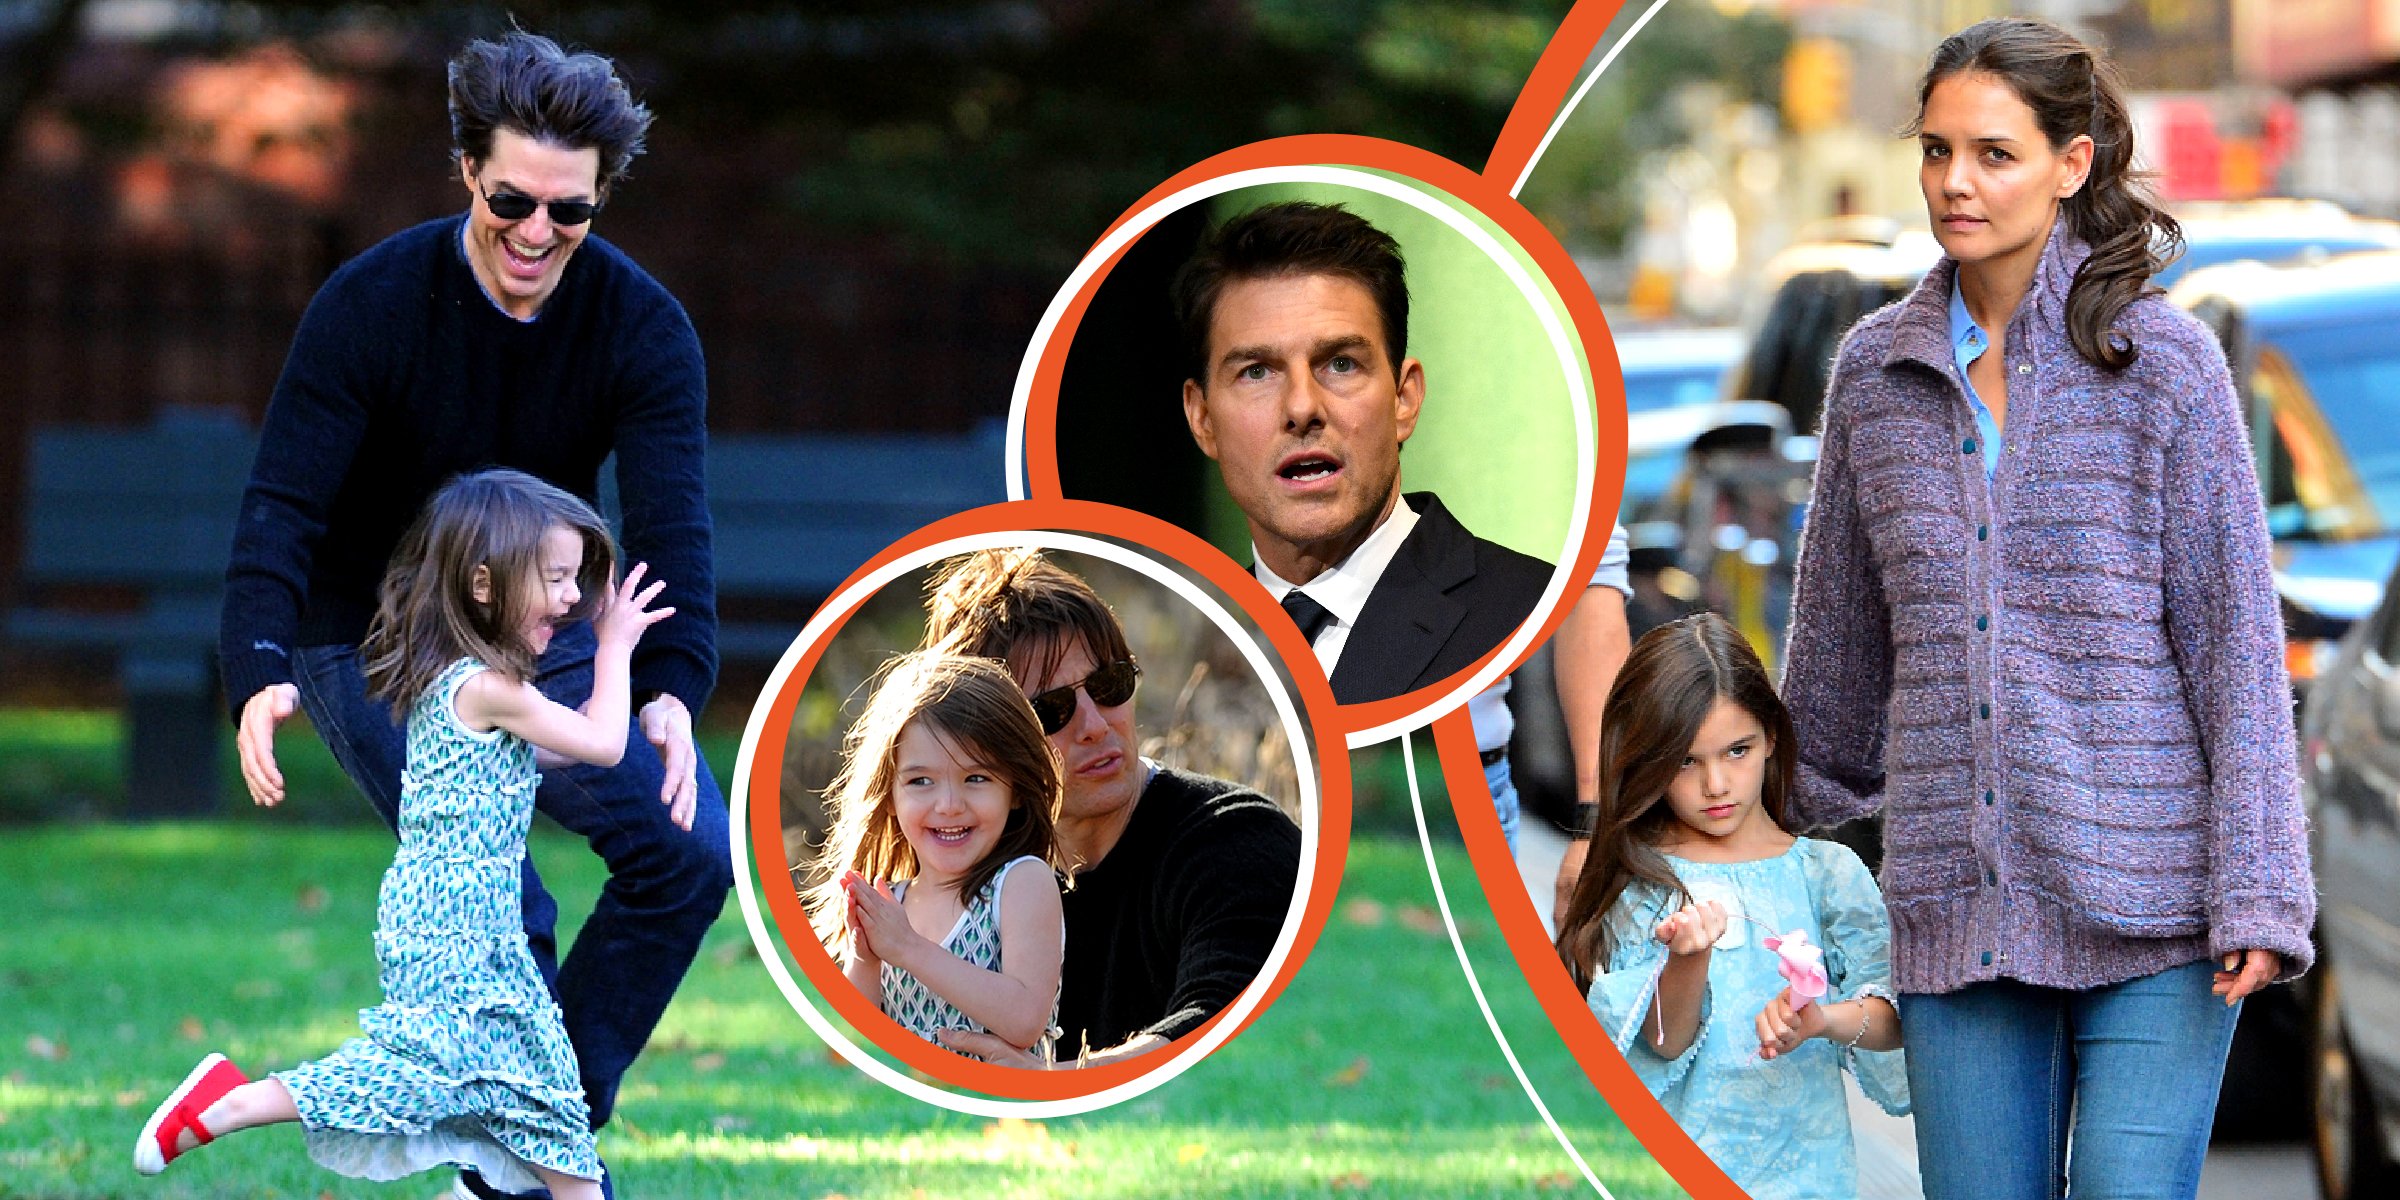 Tom and Suri Cruise | Tom Cruise | Suri Cruise and Katie Holmes | Source: Getty images